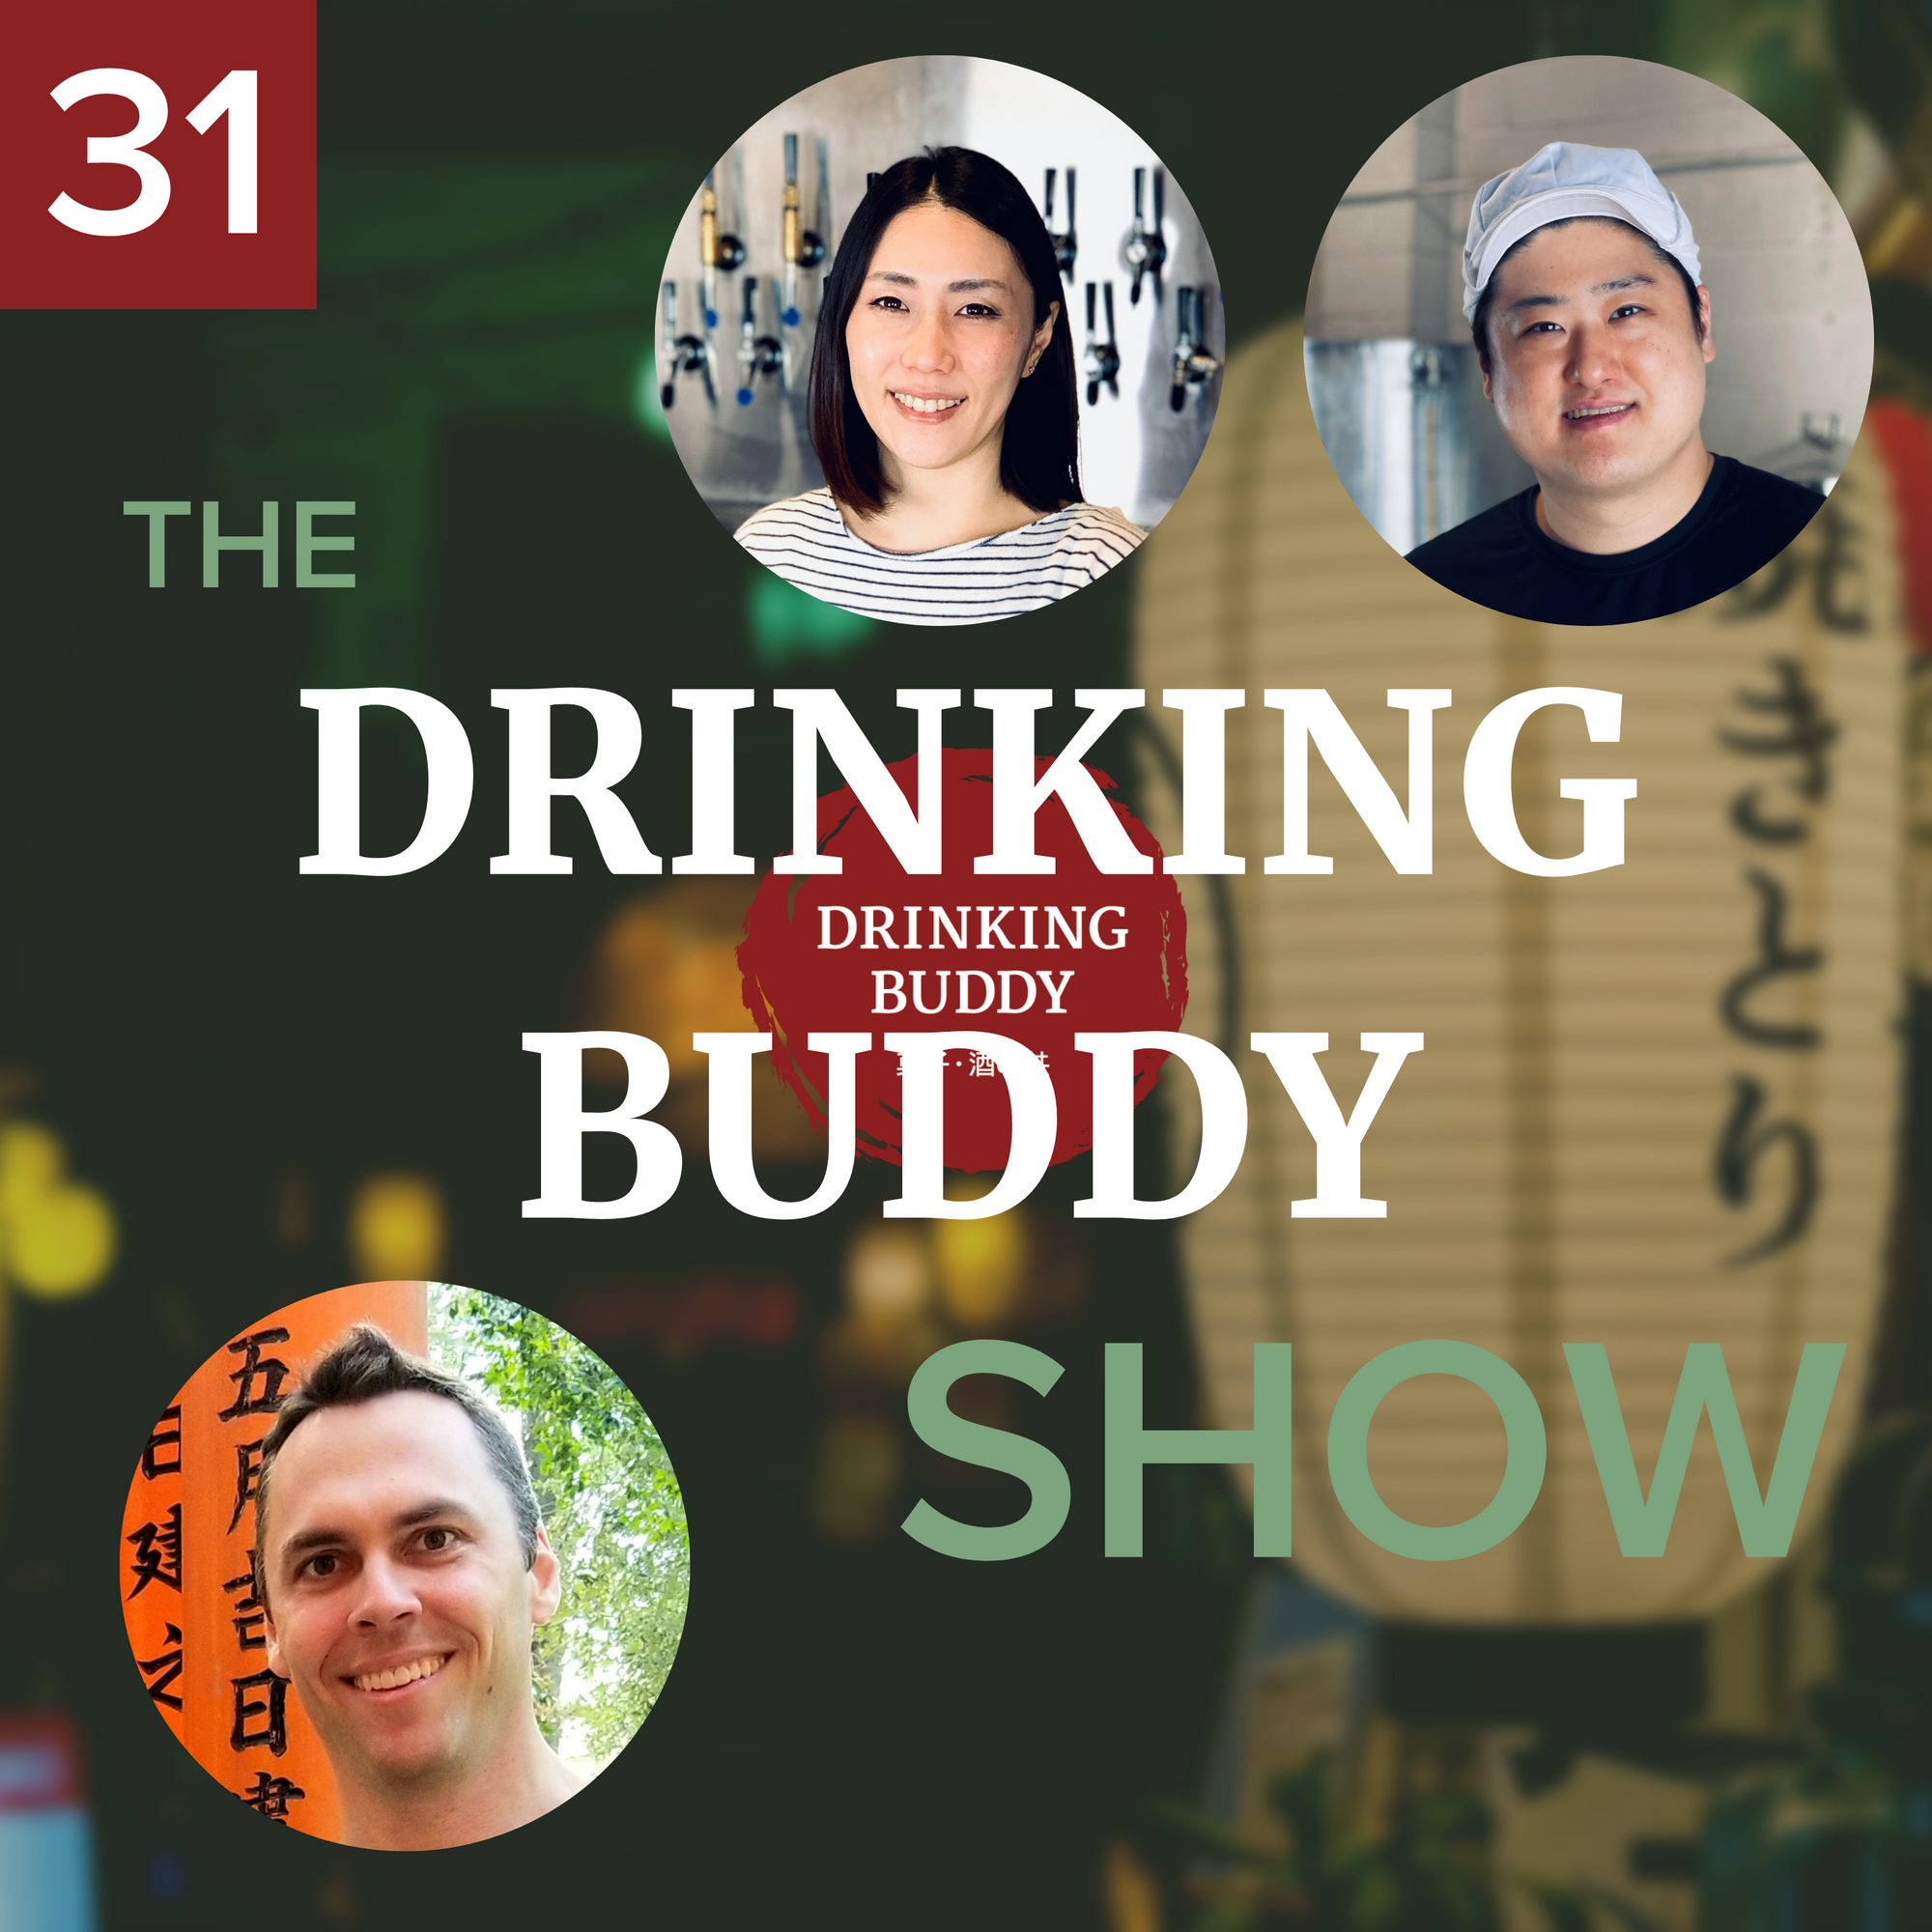 The Drinking Buddy Show Episode 31: Emiko Tanabe & James Jin of Nova Brewing Co. in Los Angeles